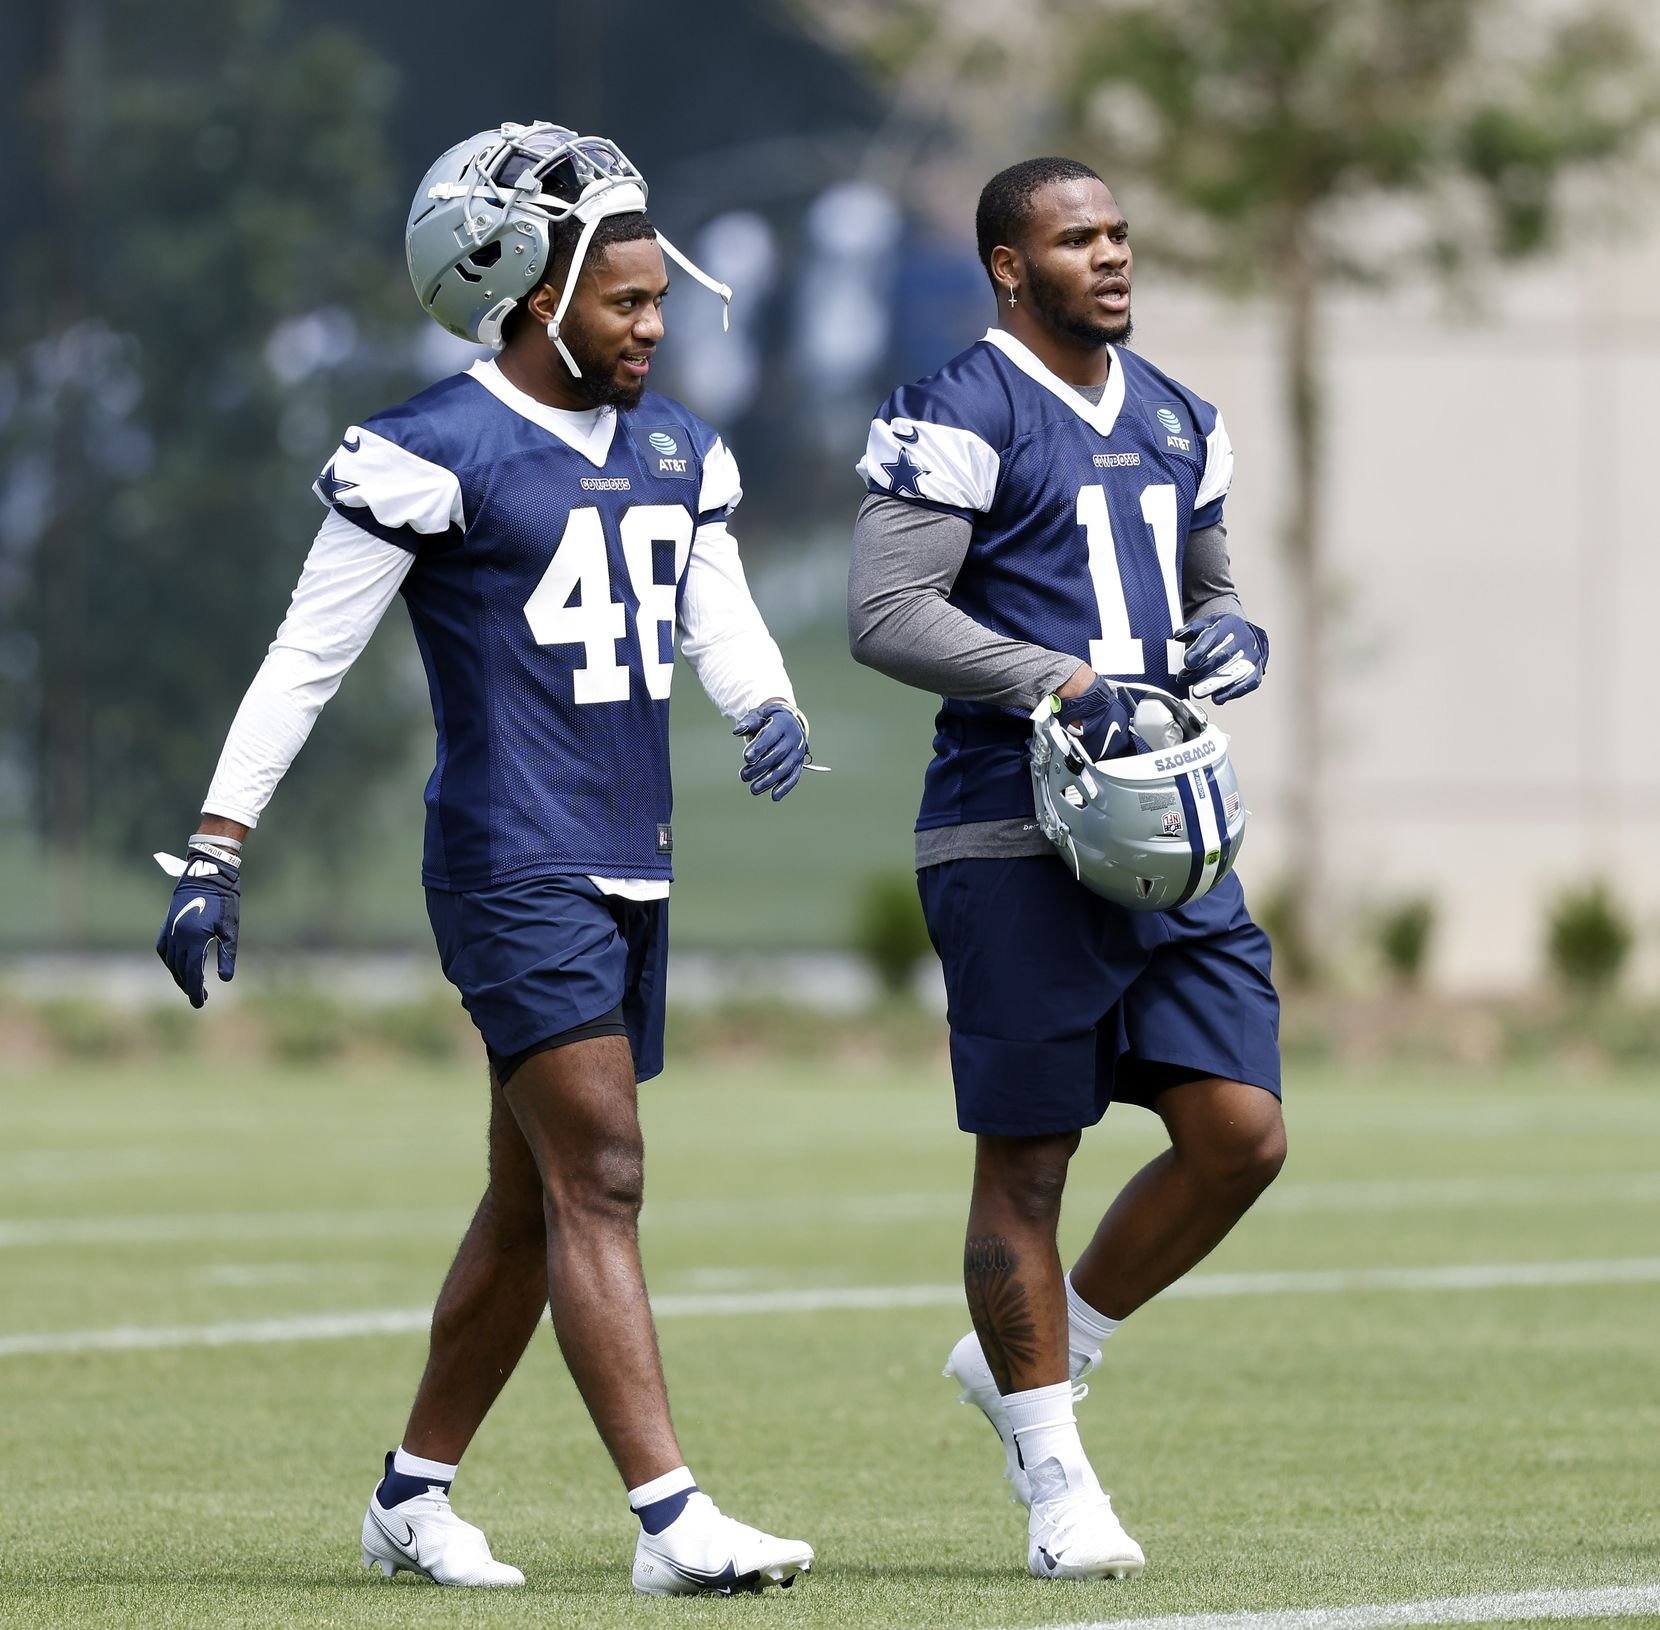 Micah Parsons, Jabril Cox Given Highest Run Defense Grades for Rookie LBs by Pro Football Focus